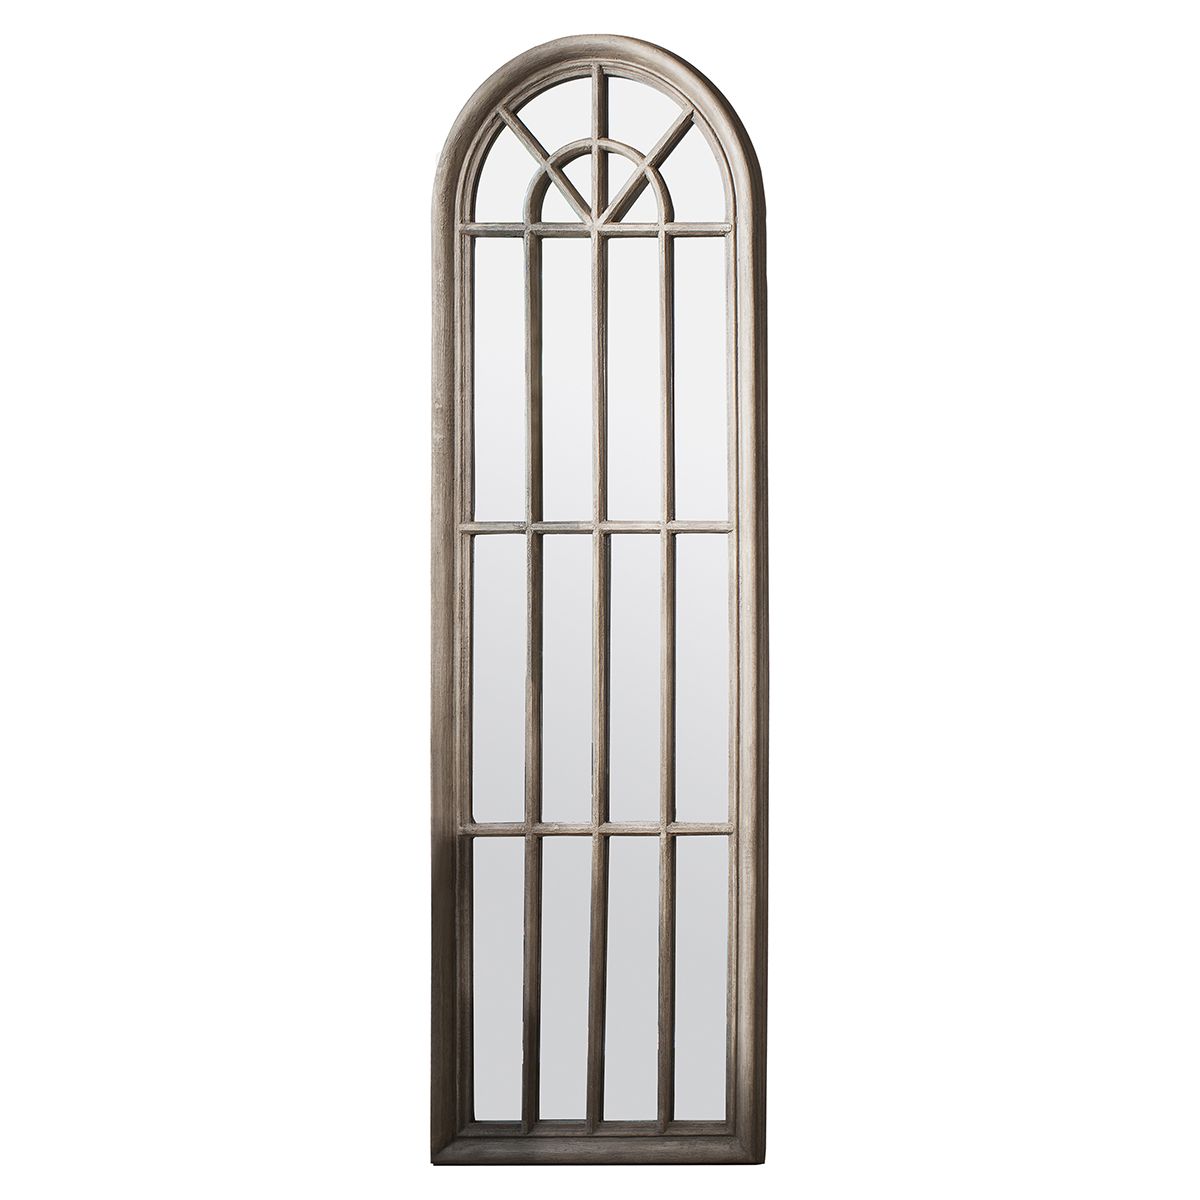 Tall Arched Window Mirror - Pavilion Interiors